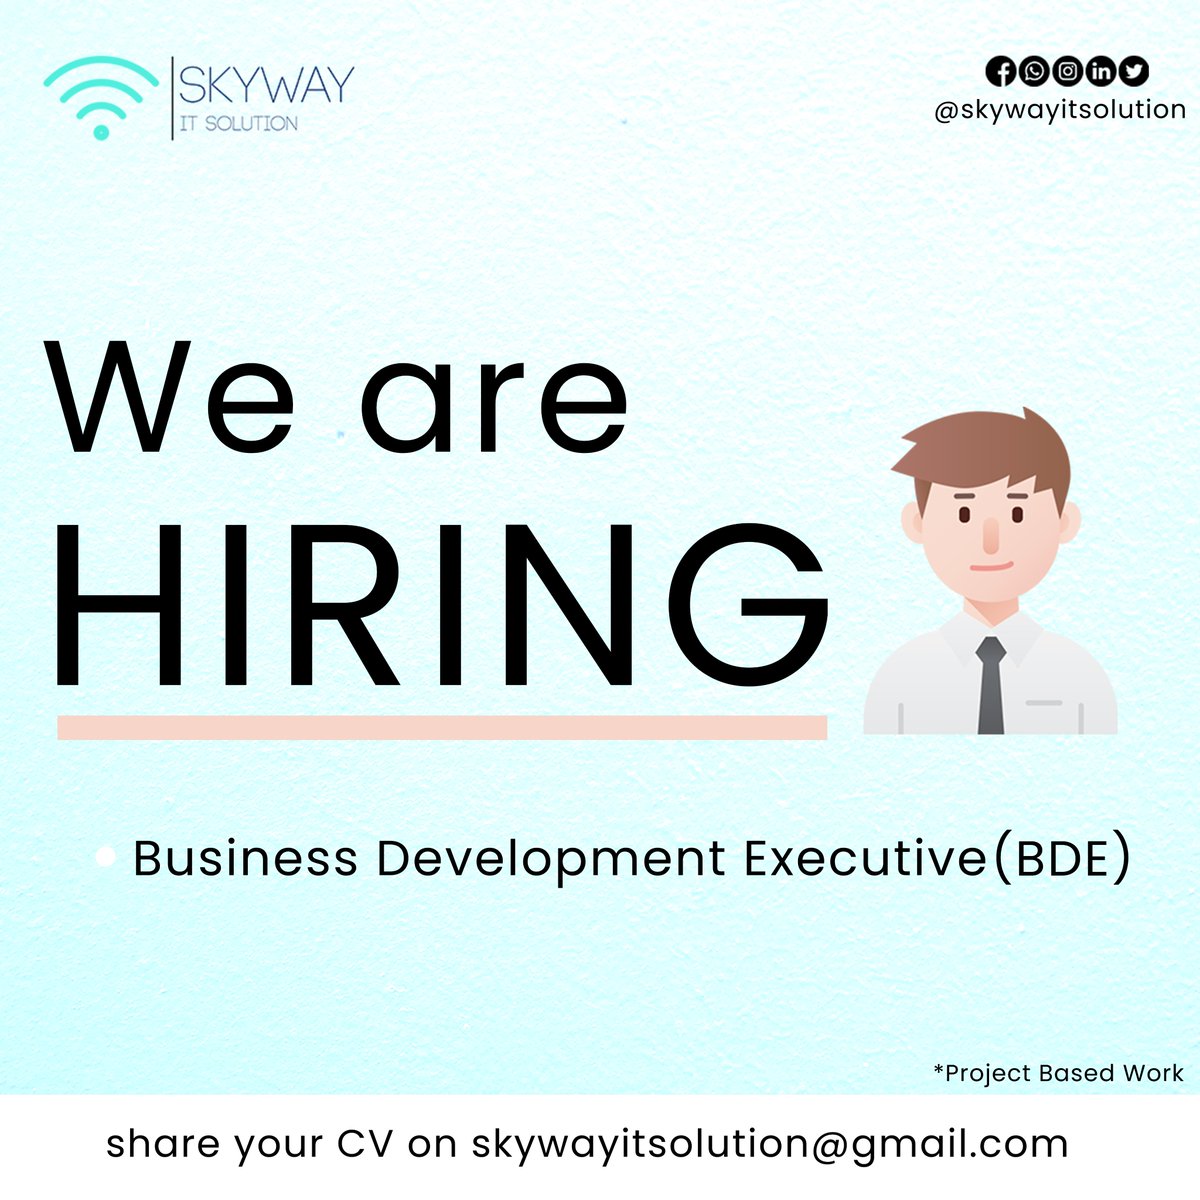 We are hiring for #BDE (#businessdevelopmentexecutive )
It's a project-based work so you can work according to your time
Interested Candidates can Mail us at skywayitsolution@gmail.com
.
.
.
#job #ITJob #itopenings #IndiaITjobs #newvacancy2023 #itvacancy #followus #SharePost